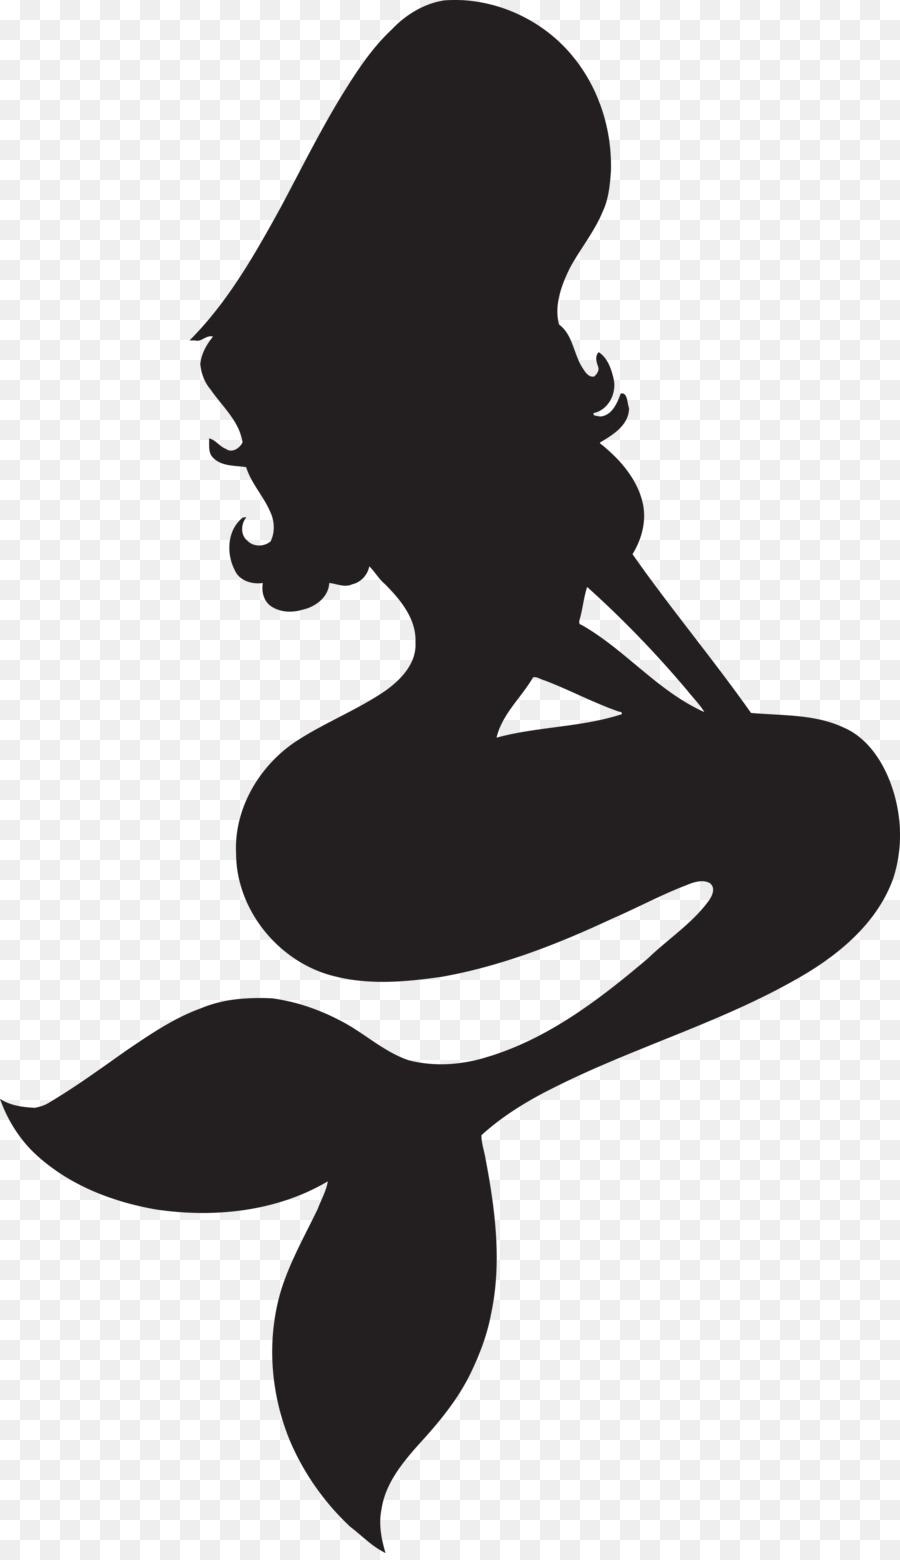 Ariel Silhouette Stencil The Little Mermaid - silhouette png download - 4000*6902 - Free Transparent Ariel png Download.